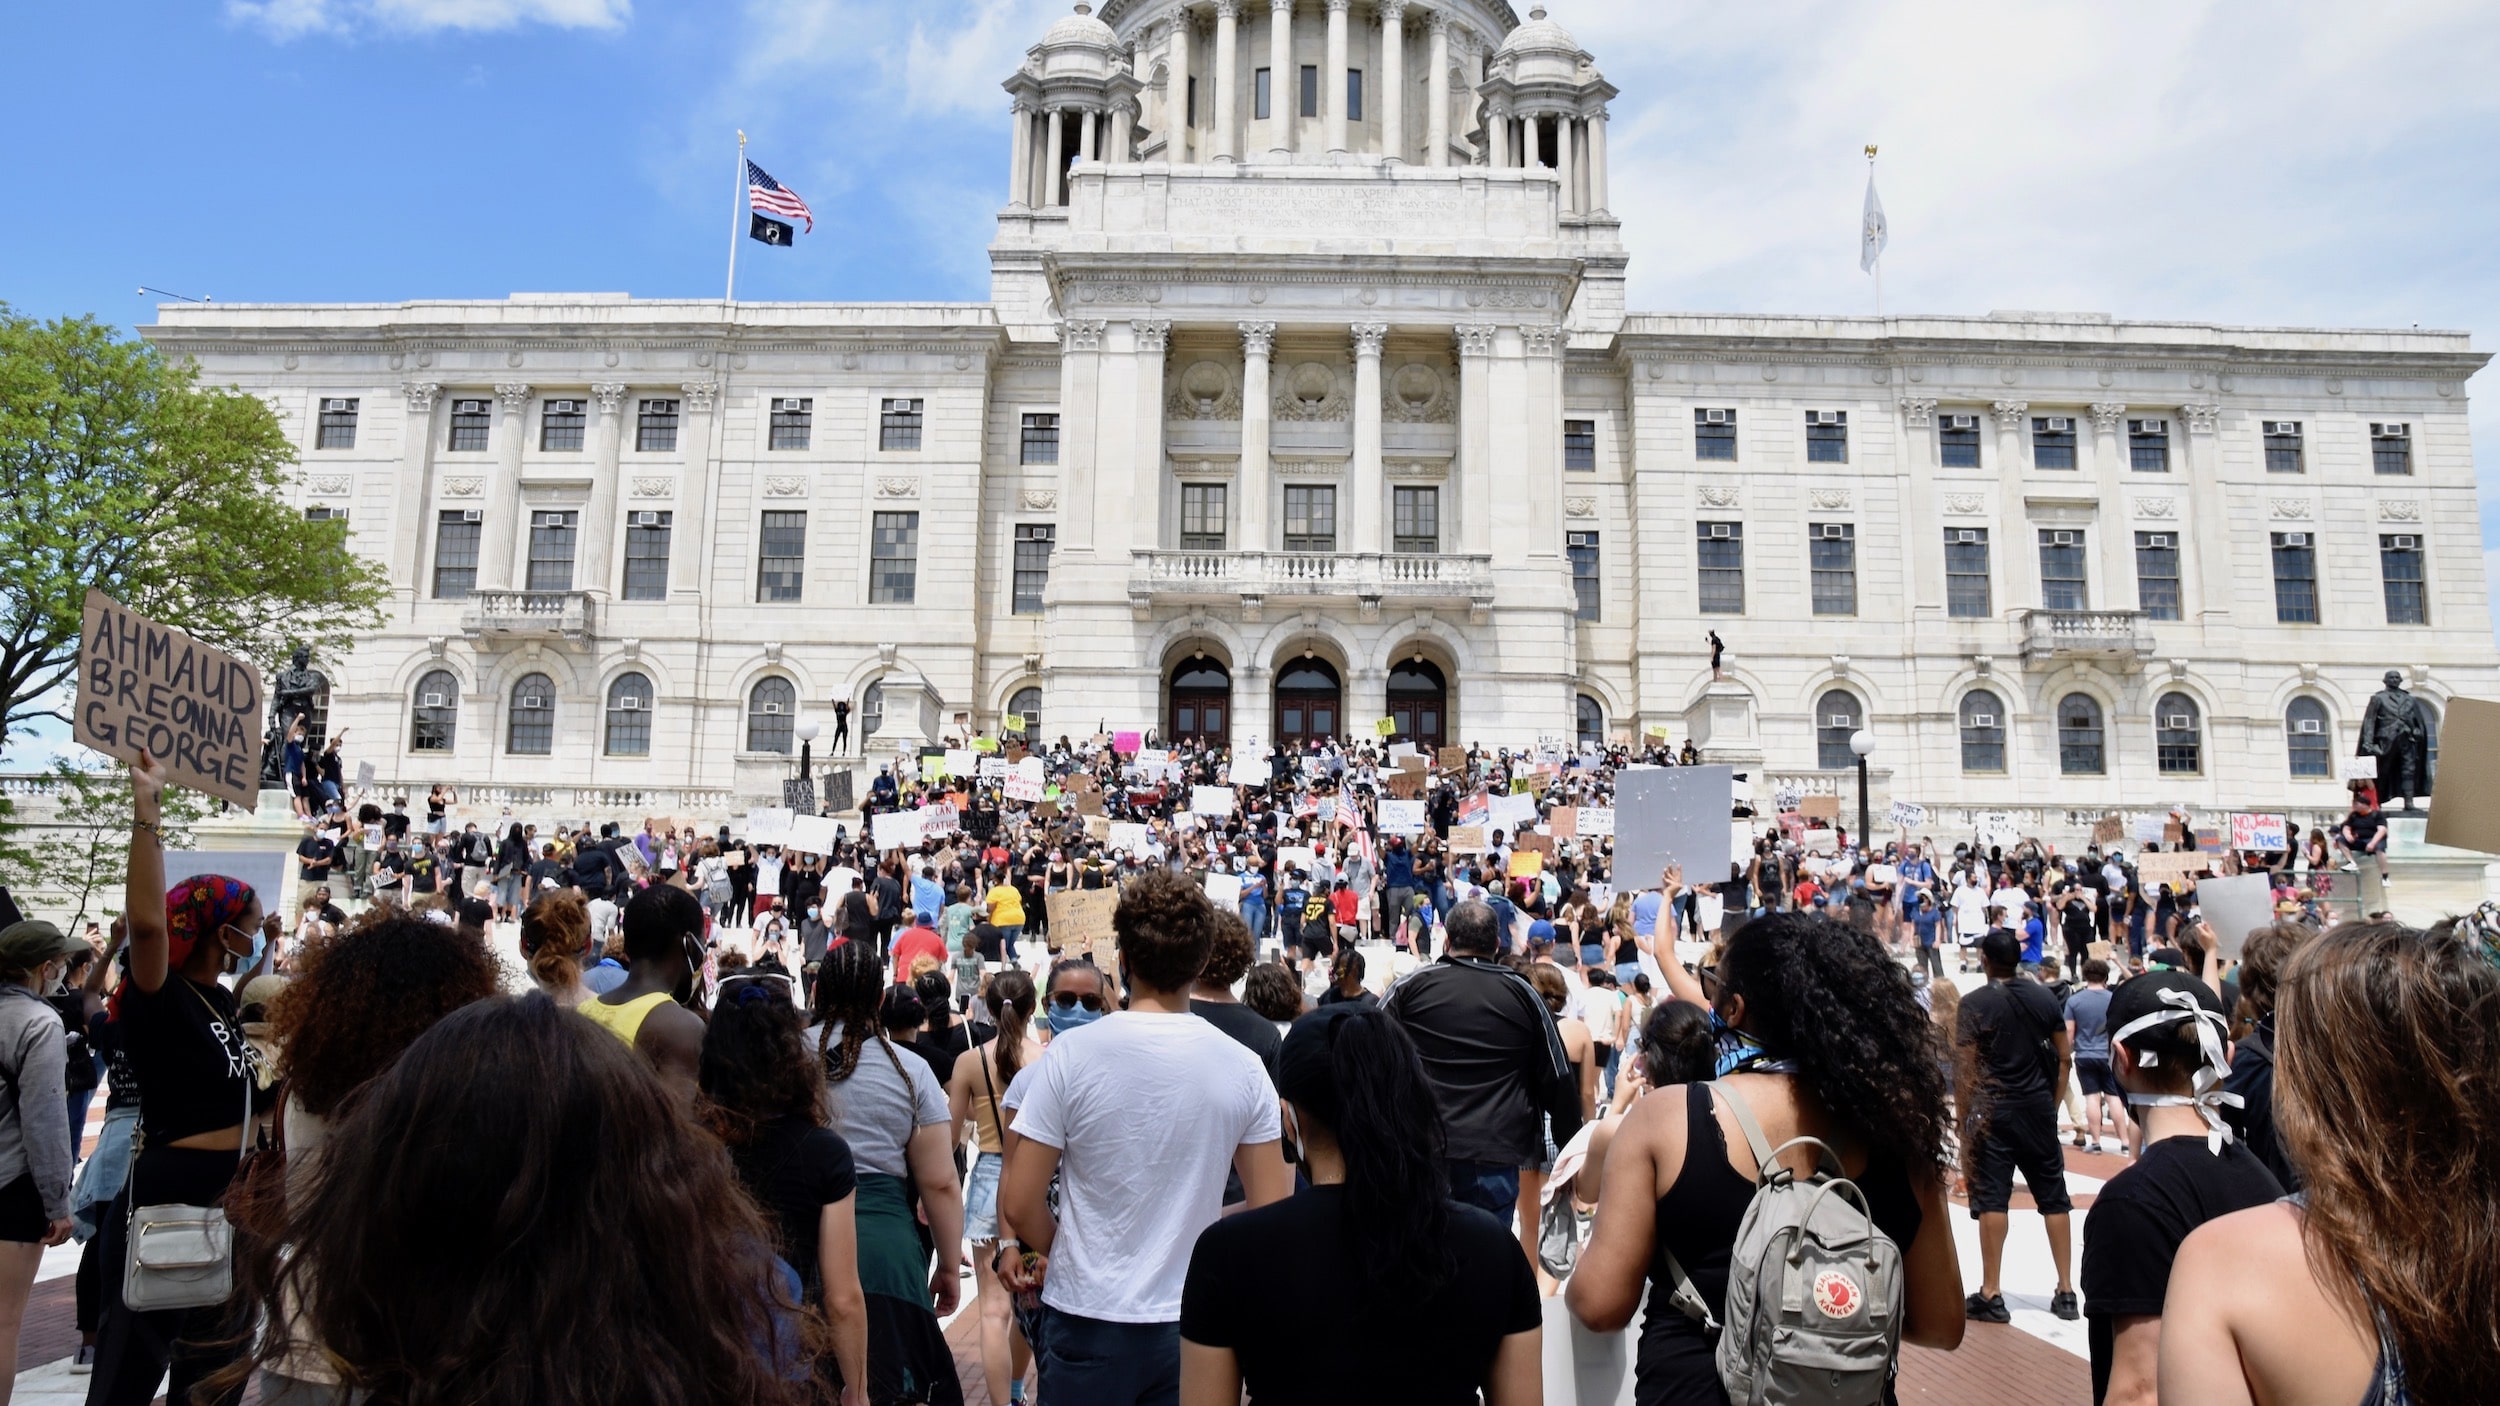 Protesters in Providence, Rhode Island in front of the state legislature during the 2020 George Floyd protests.